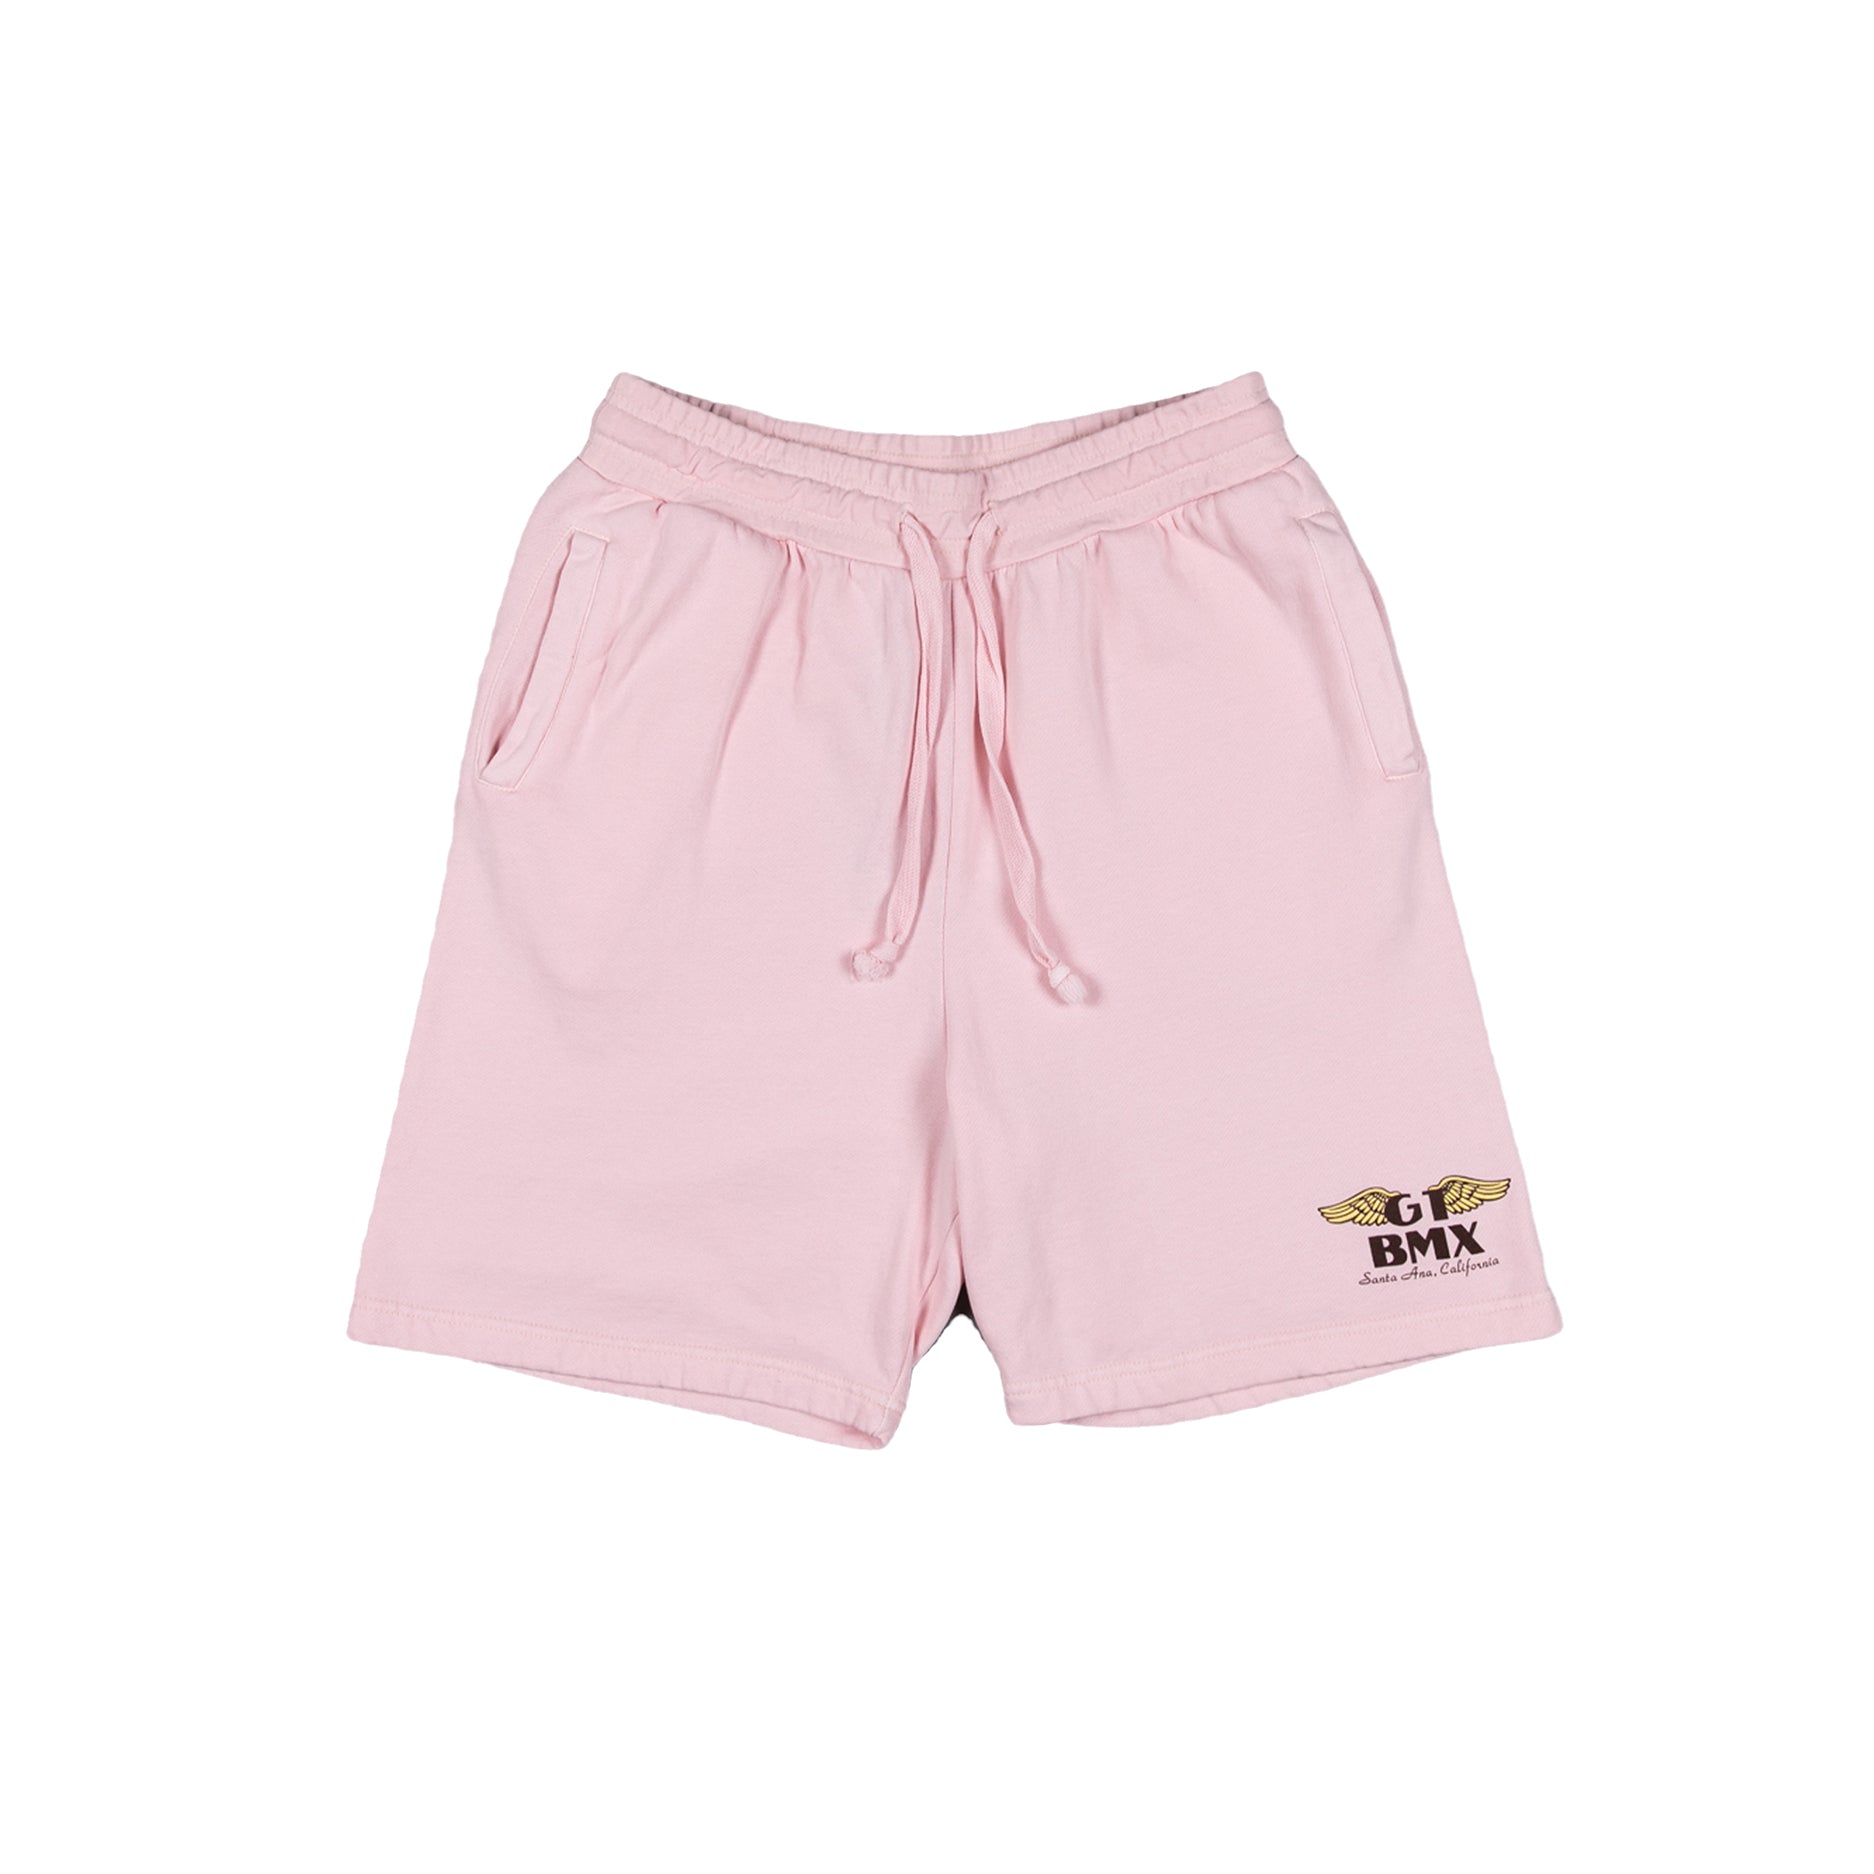 GT Wings Sweat Shorts - Pink Clay